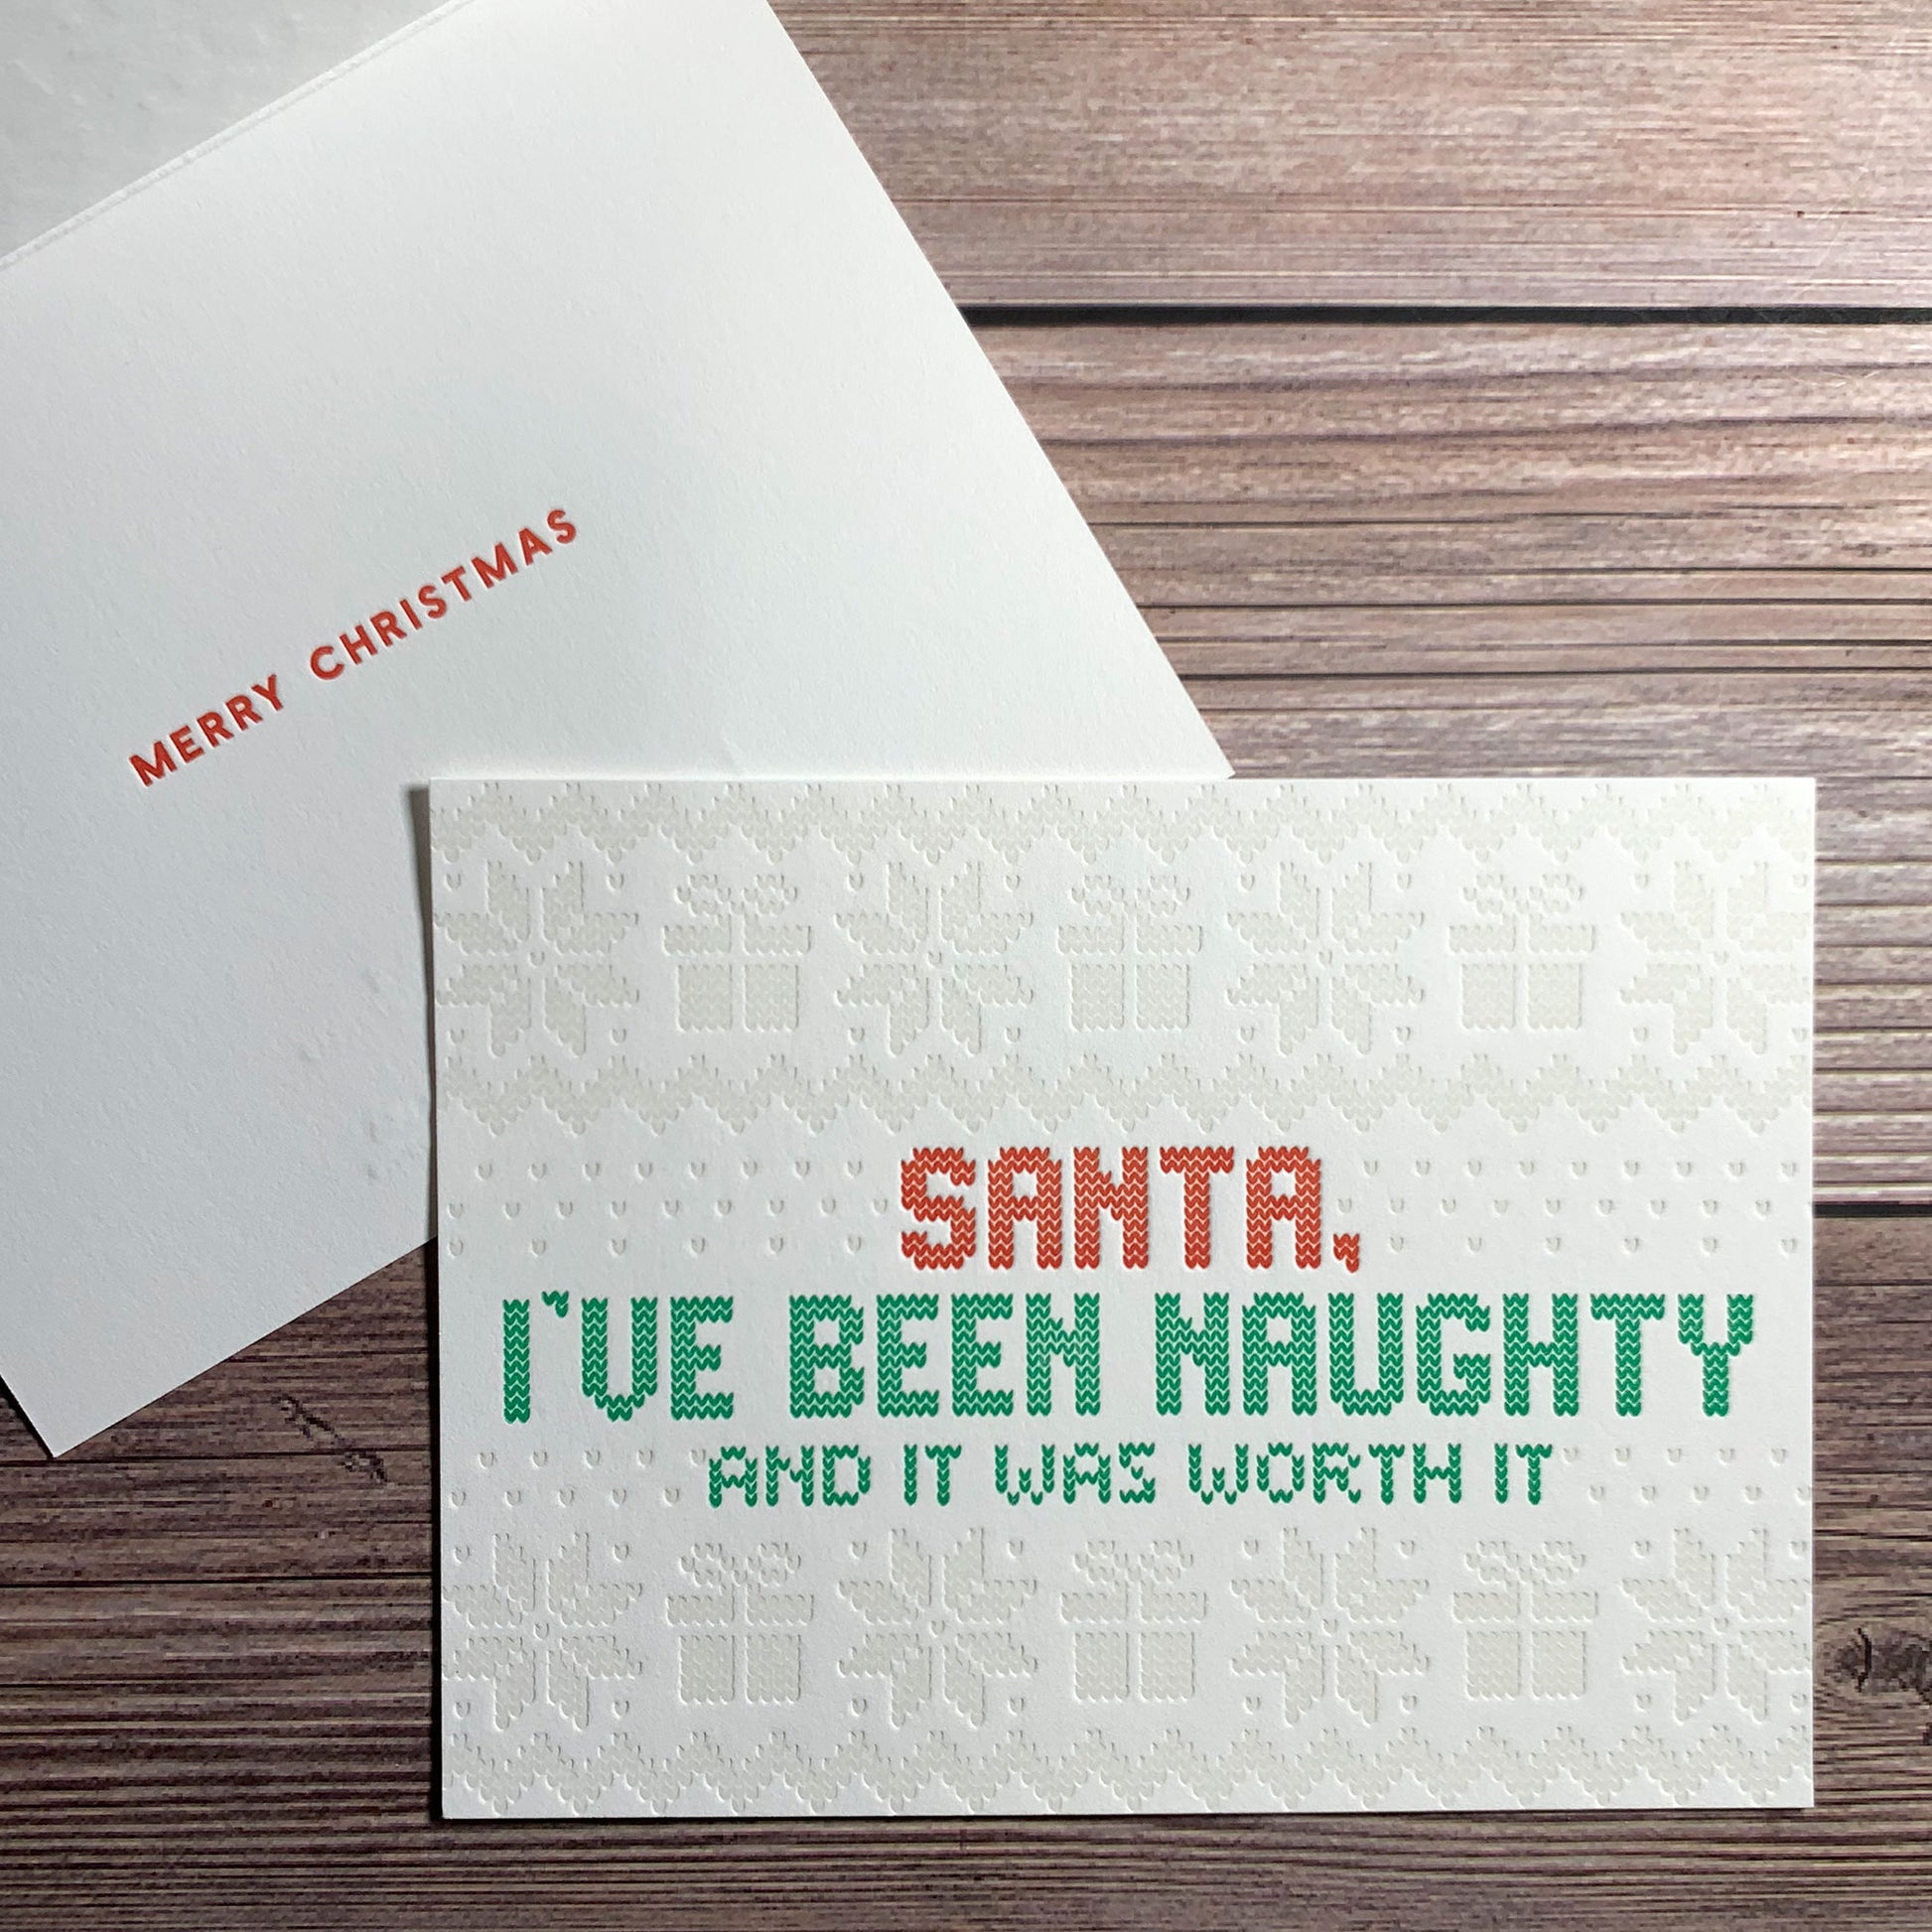 Santa, I've been naughty and it was worth it, Ugly Christmas Sweater card, inside message: Merry Christmas, Letterpress printed, includes envelope